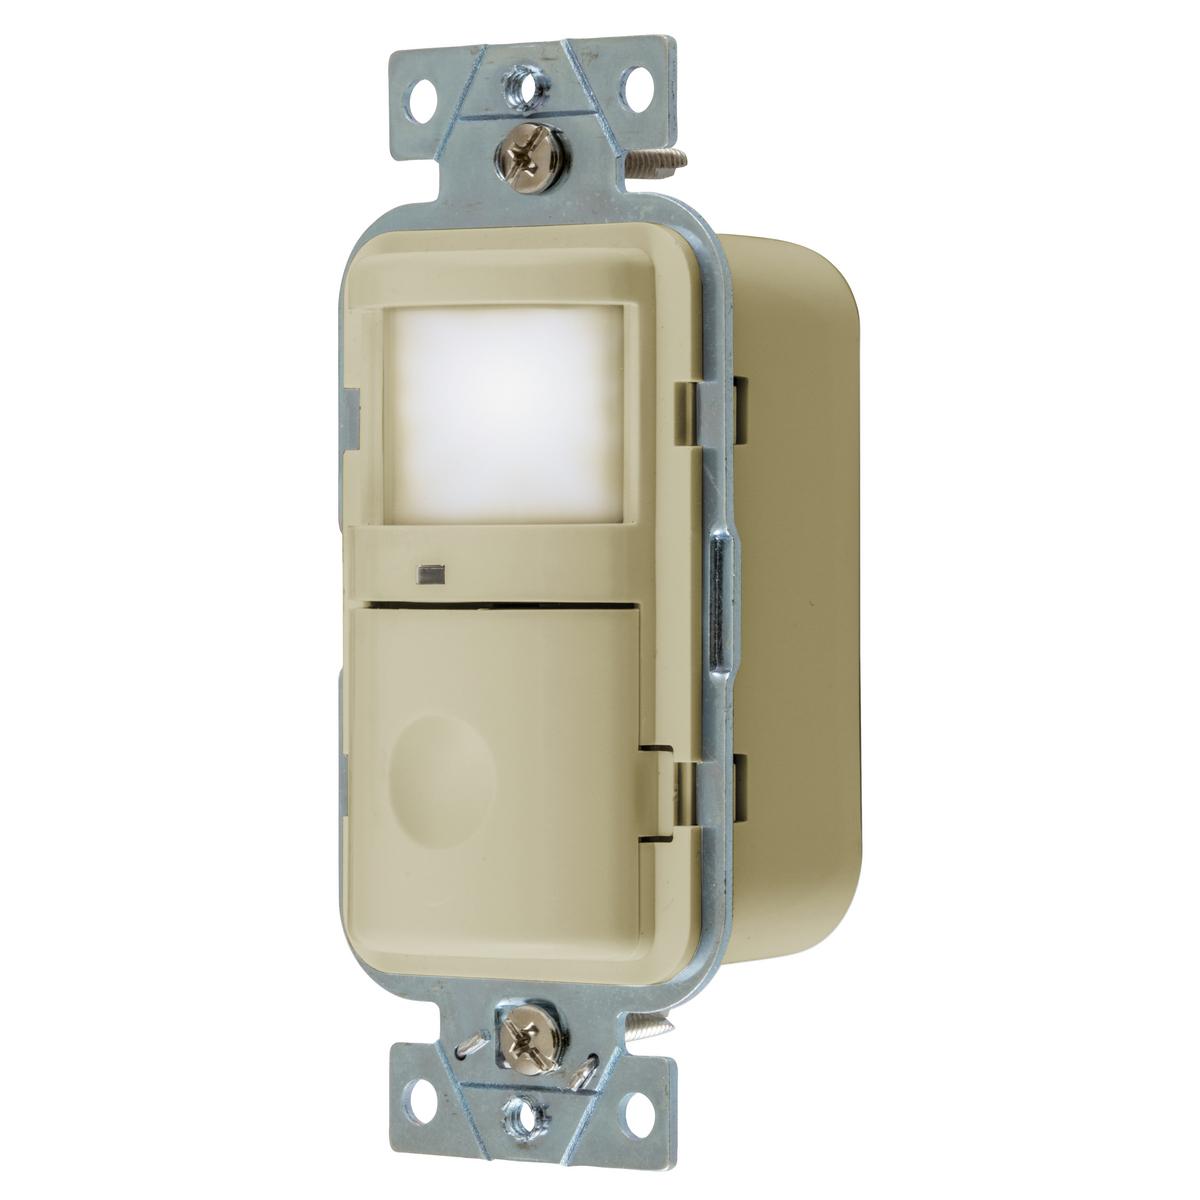 Hubbell WS1000NI Lighting Controls, Vacancy/Occupancy Sensors, Wall Switch, Passive Infrared Technology, Single Circuit, 120V AC, 500 Watt, With Night Light, Ivory  ; With Nightlight ; 